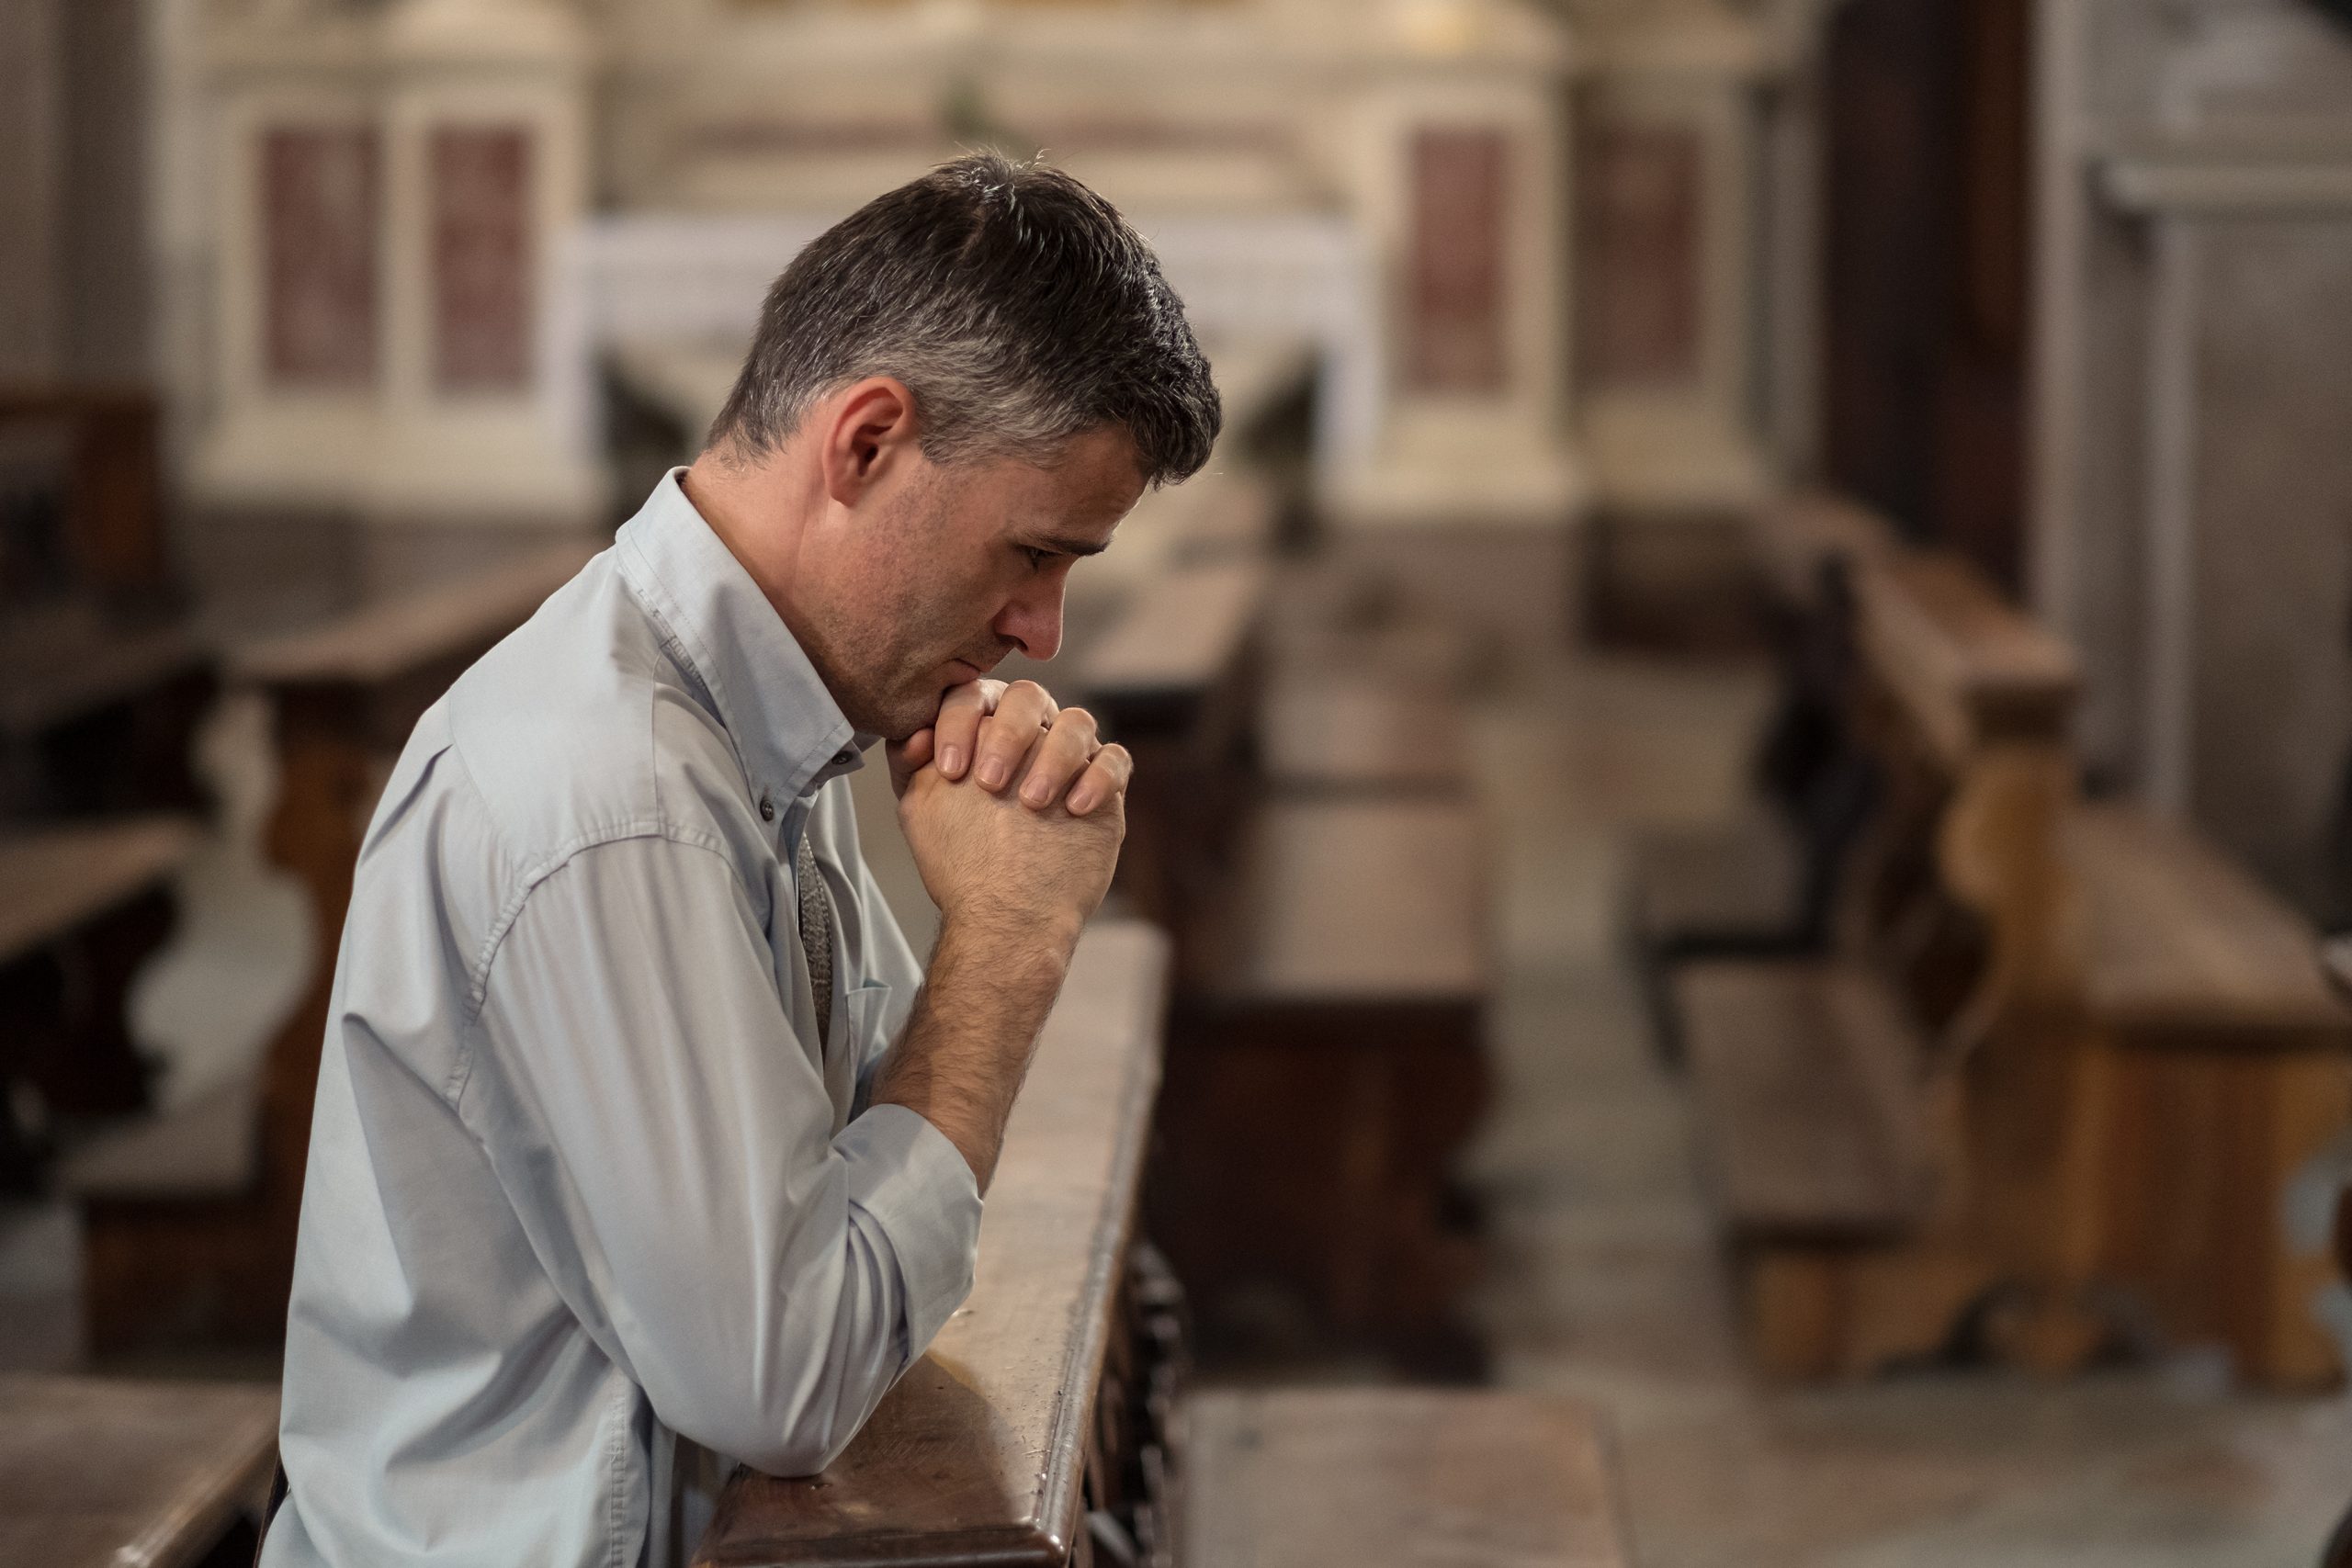 psalm-4-a-lesson-for-praying-through-conflict